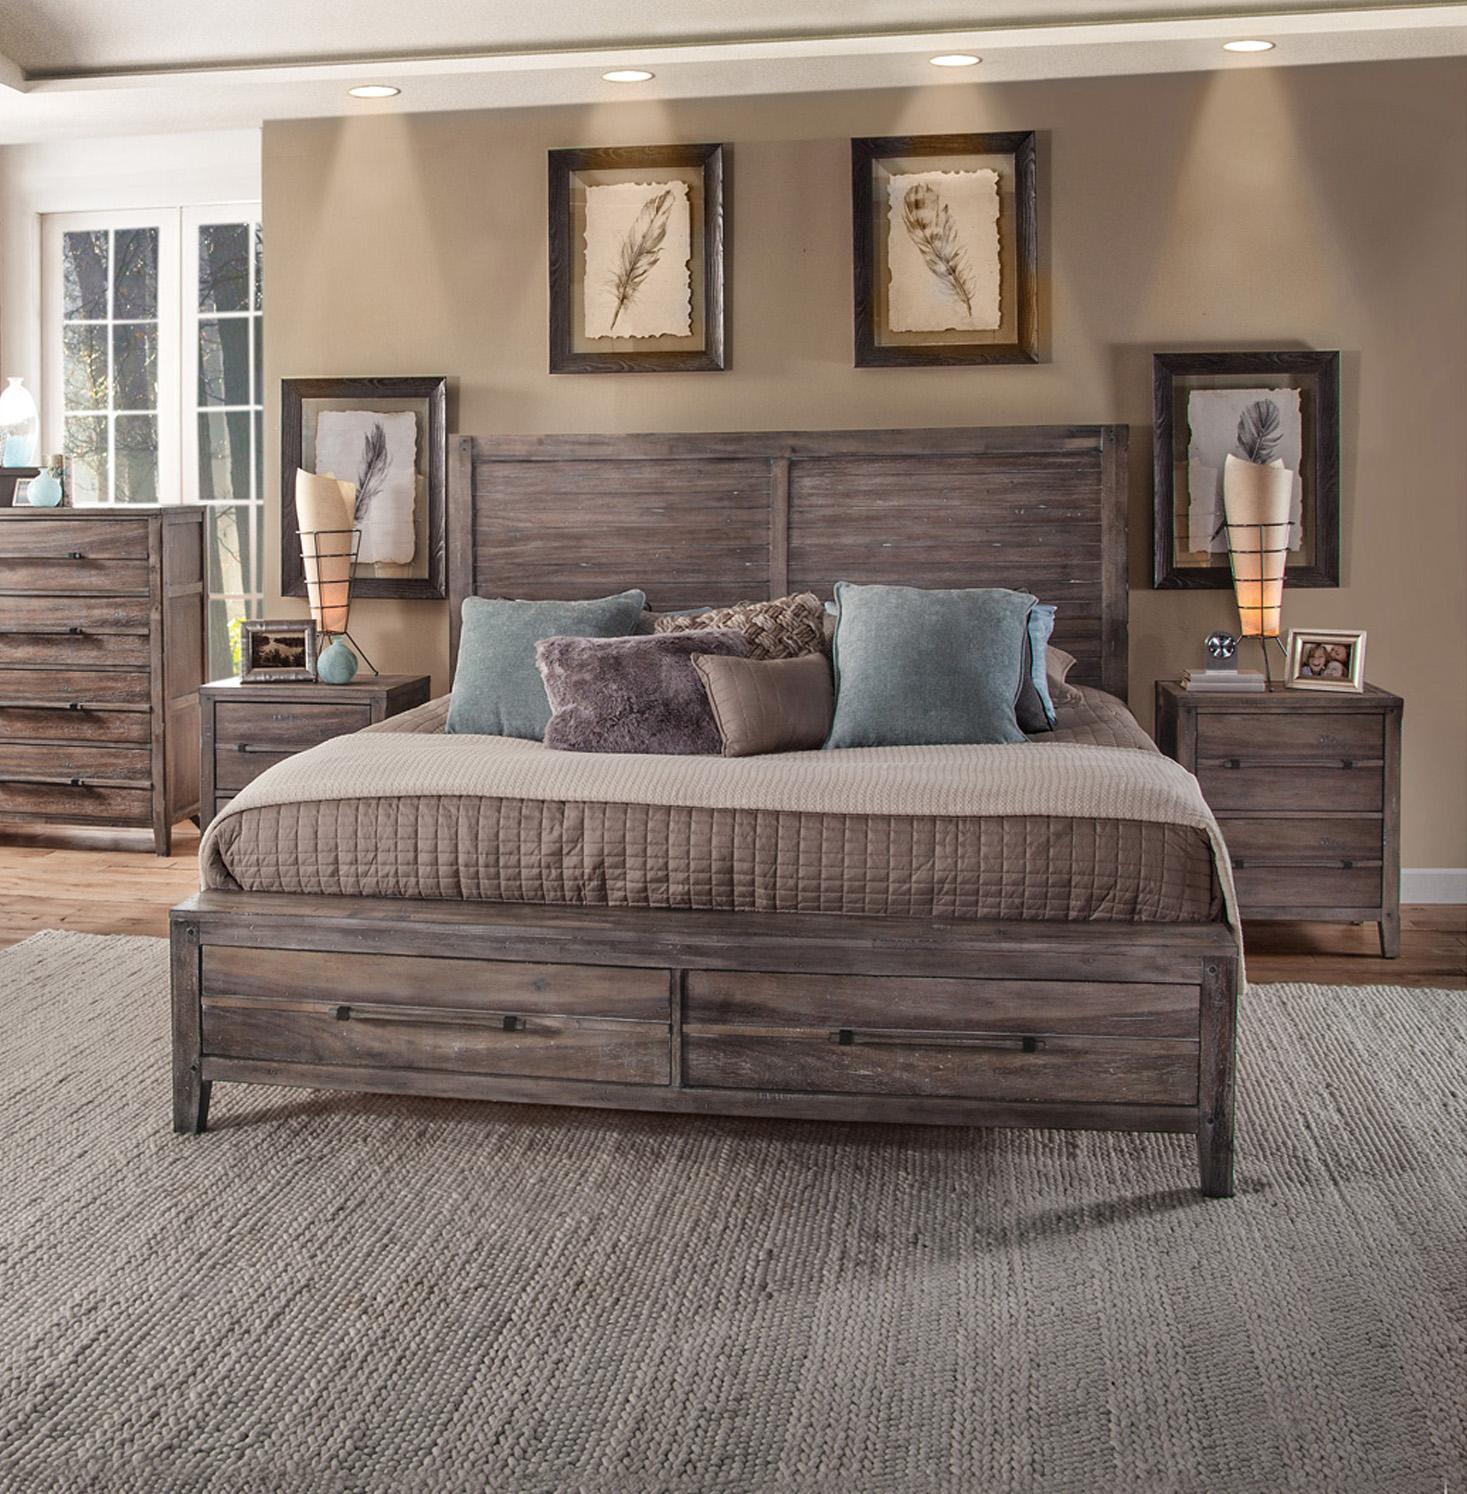 

    
American Woodcrafters AURORA 2800-50PNST Panel Bedroom Set Driftwood/Gray 2800-QPNST-5PC
